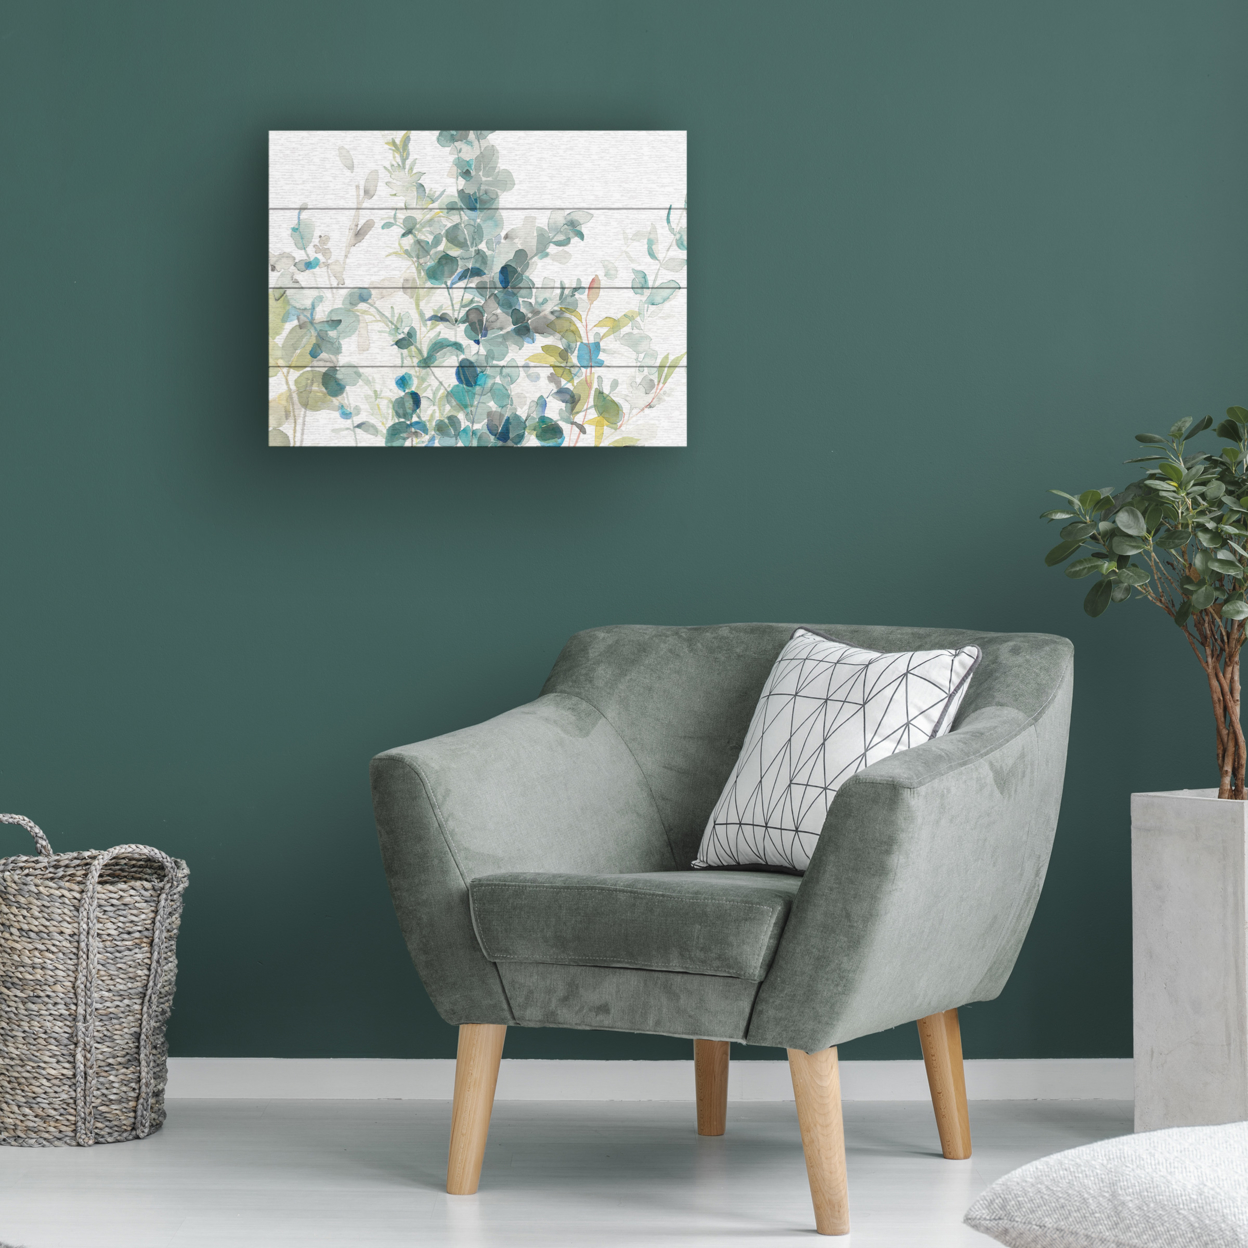 Wall Art 12 X 16 Inches Titled Eucalyptus I White Crop Ready To Hang Printed On Wooden Planks